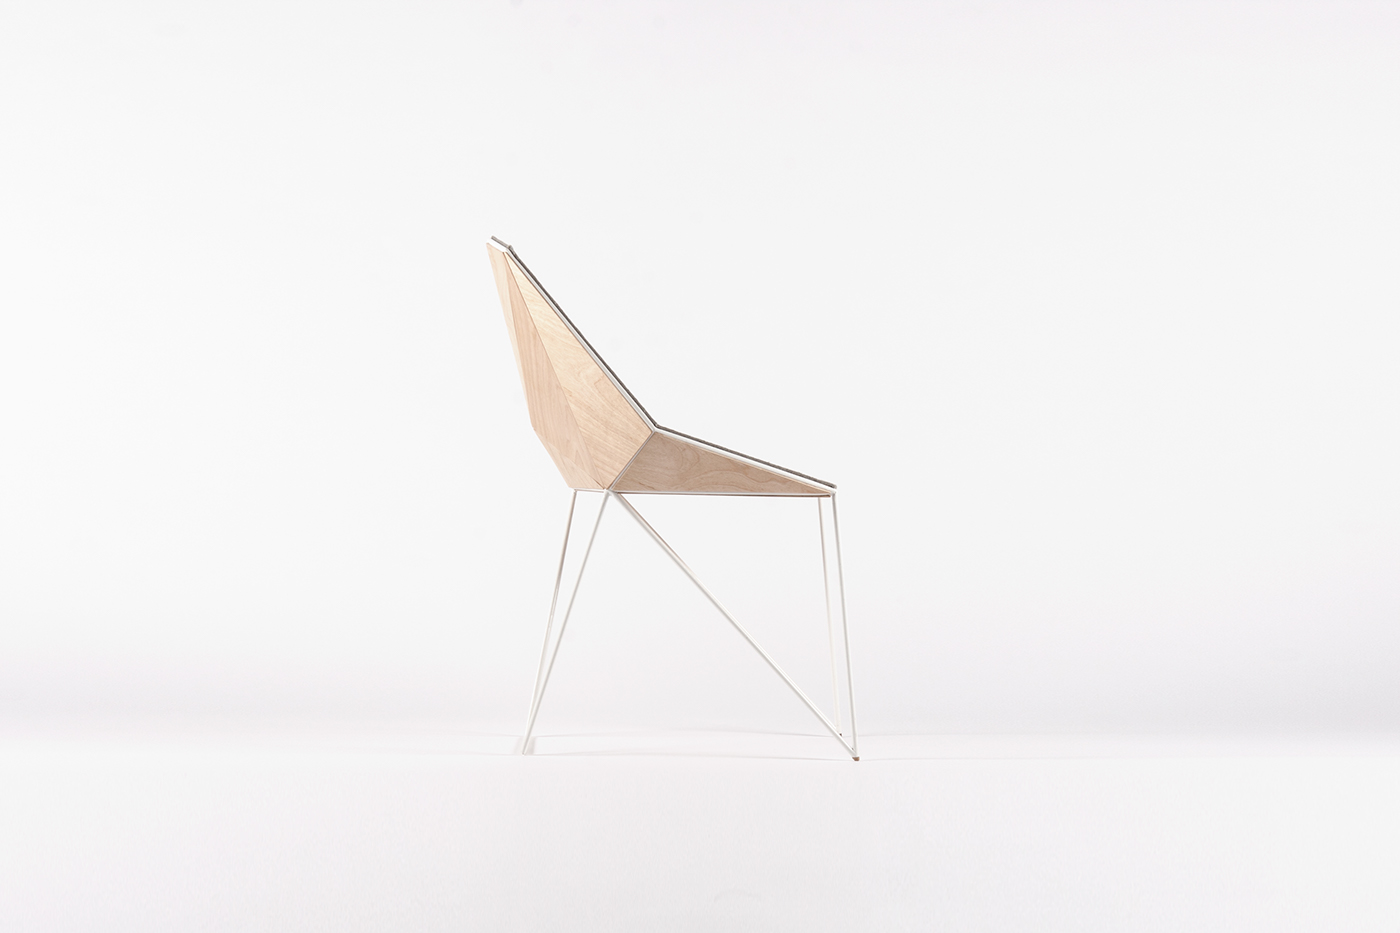 P-11 chair plywood chair plan-s23 p11